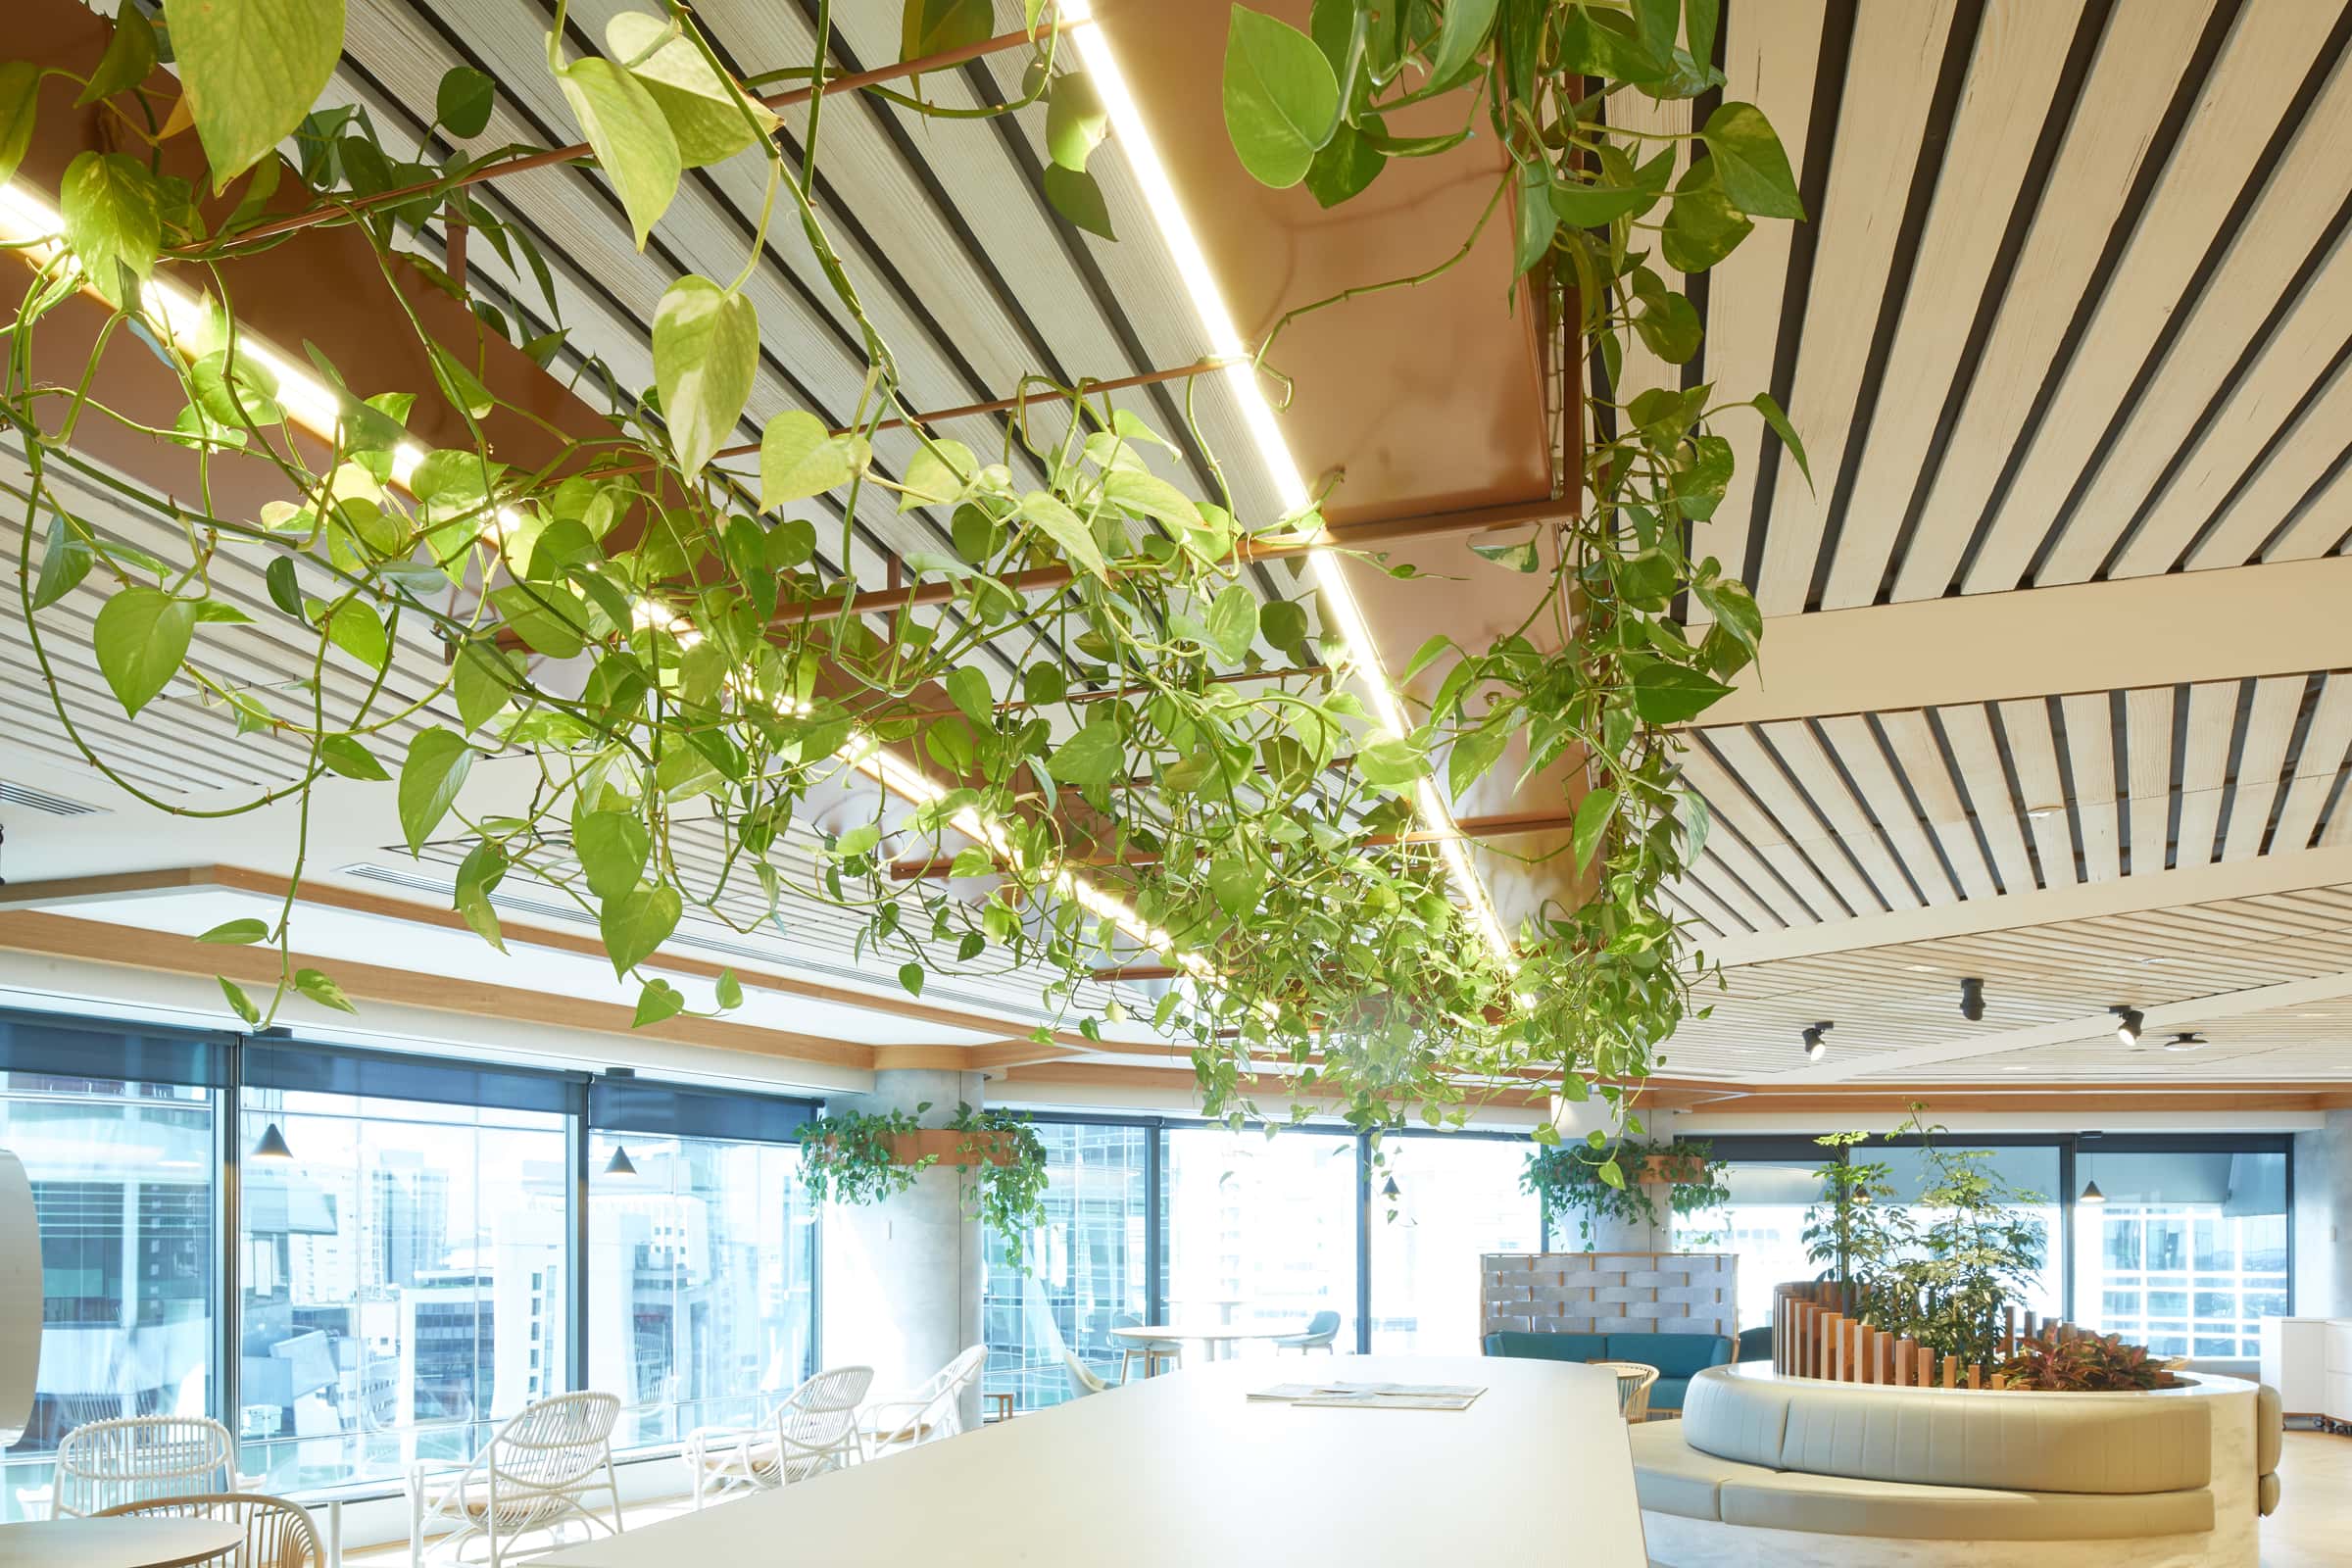 Professional photography of Deloitte Brisbane's staff kitchen, with trailing Pothos hanging from the kitchen table lighting fixture. Representing our indoor plant hire services.